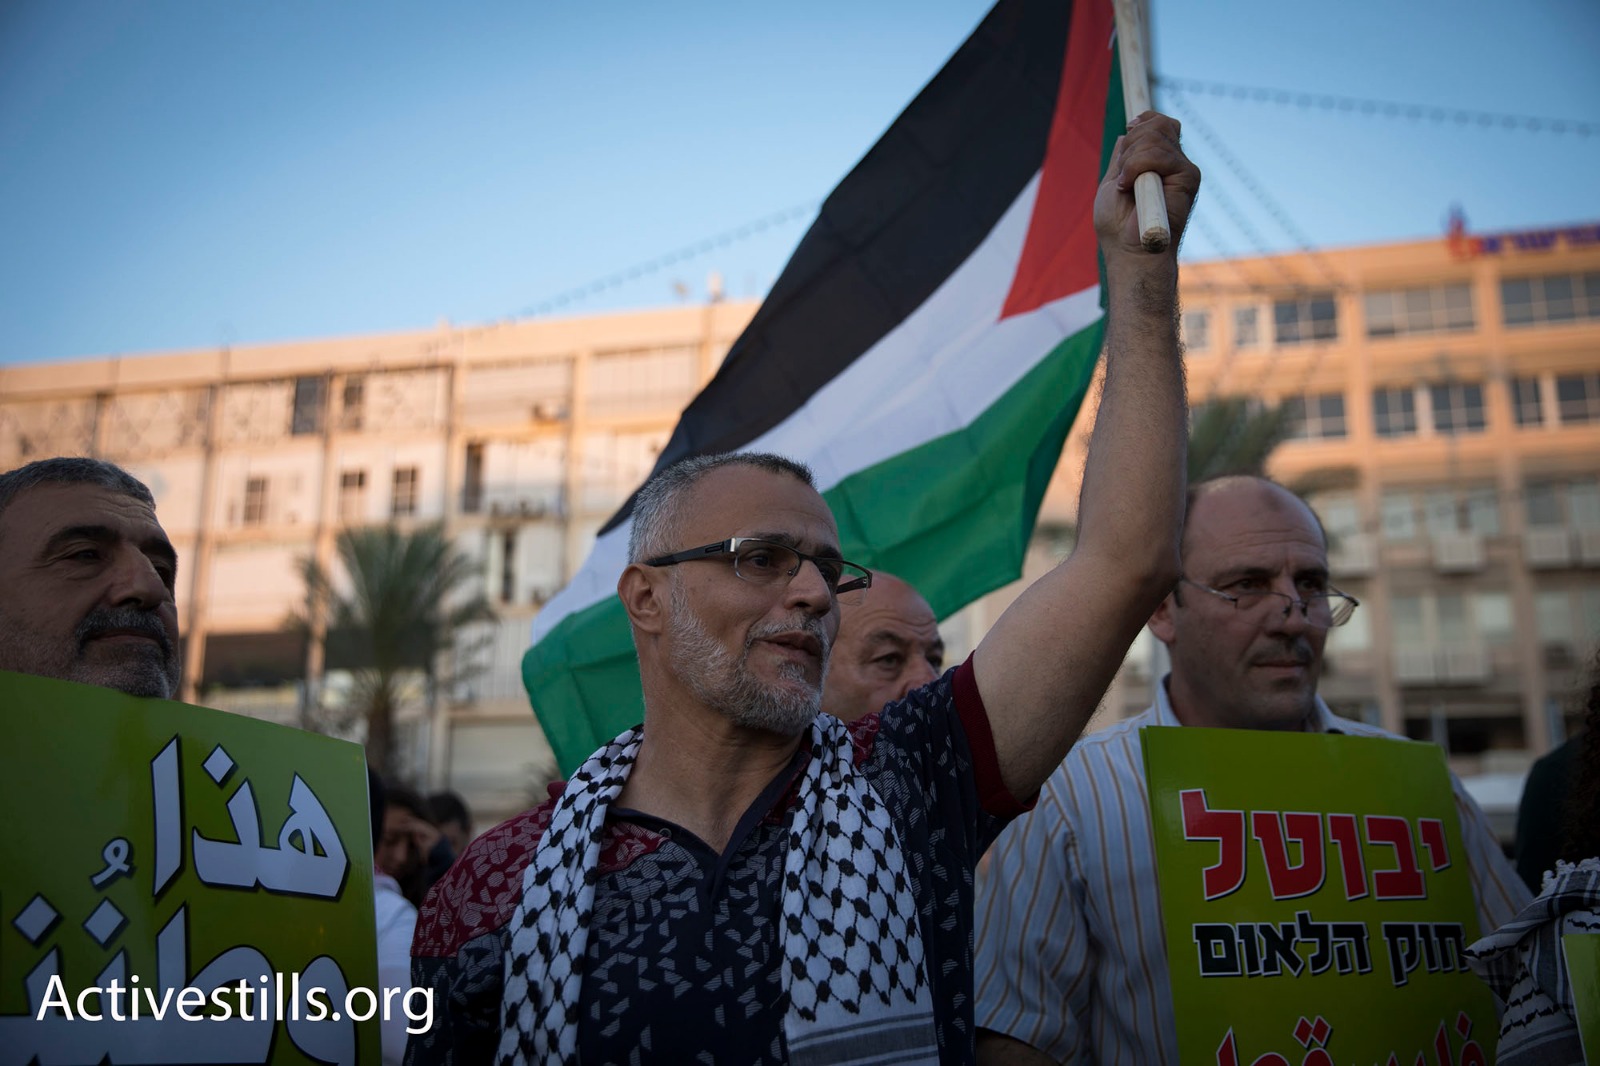 A Palestinian citizen of Israel waves a Palestinian flag during a protest against the Jewish Nation-State Law, central Tel Aviv, August 12, 2018. (Oren Ziv/Activestills.org)